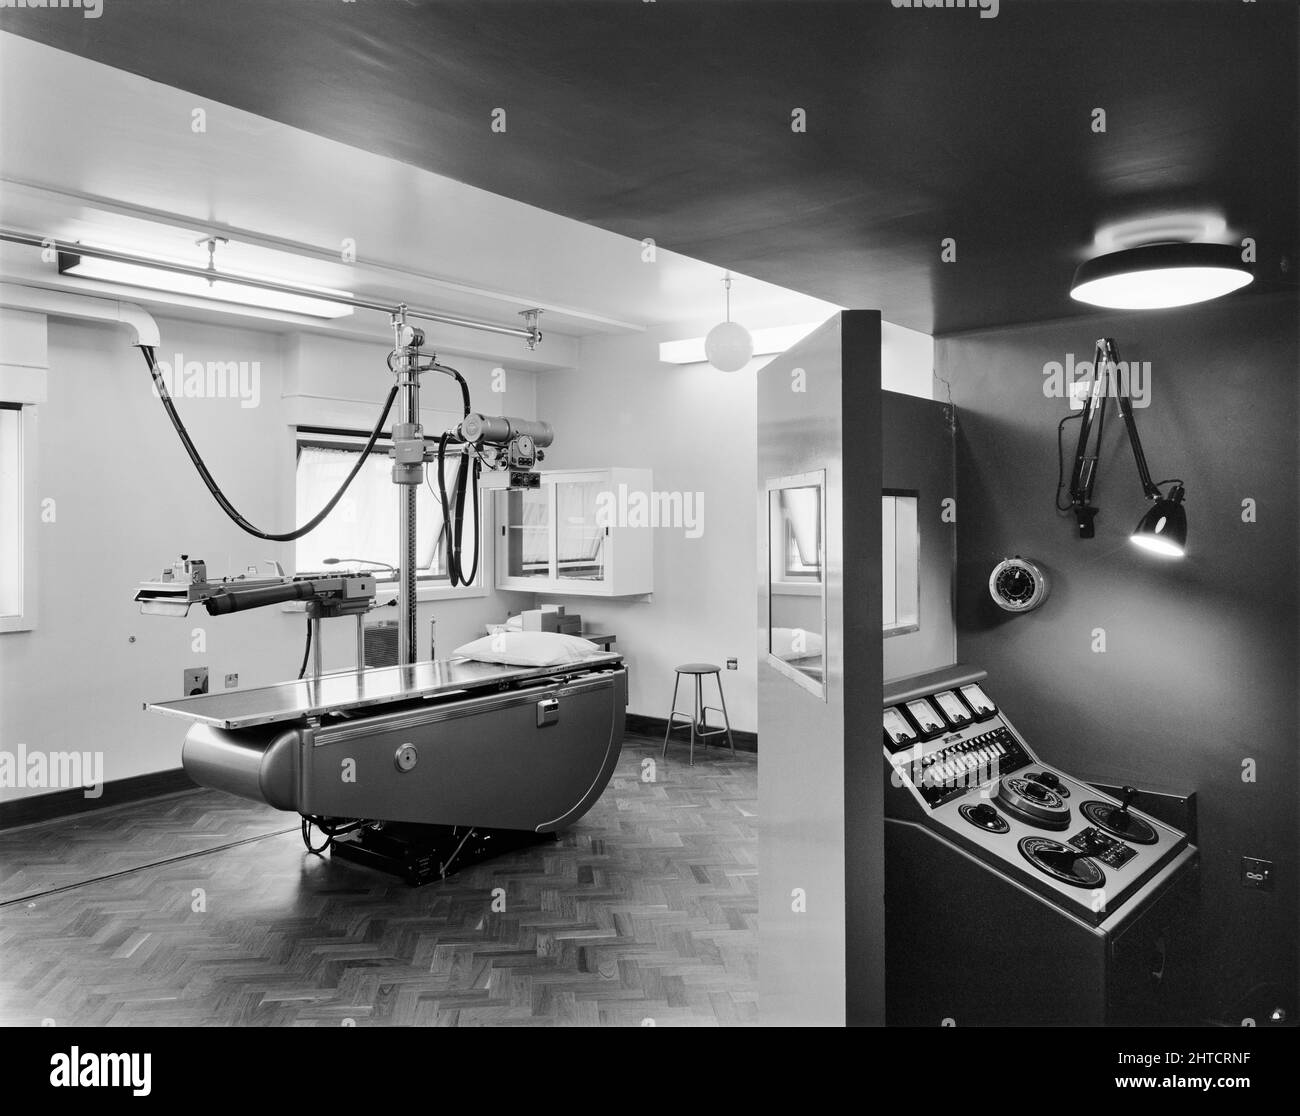 West Cumberland Hospital, Homewood Road, Homewood, Whitehaven, Copeland, Cumbria, 27/08/1964. An x-ray room in the radiography department at West Cumberland Hospital showing the control booth. This photograph appeared in the December 1964 issue of Team Spirit, the Laing company newsletter. Stock Photo